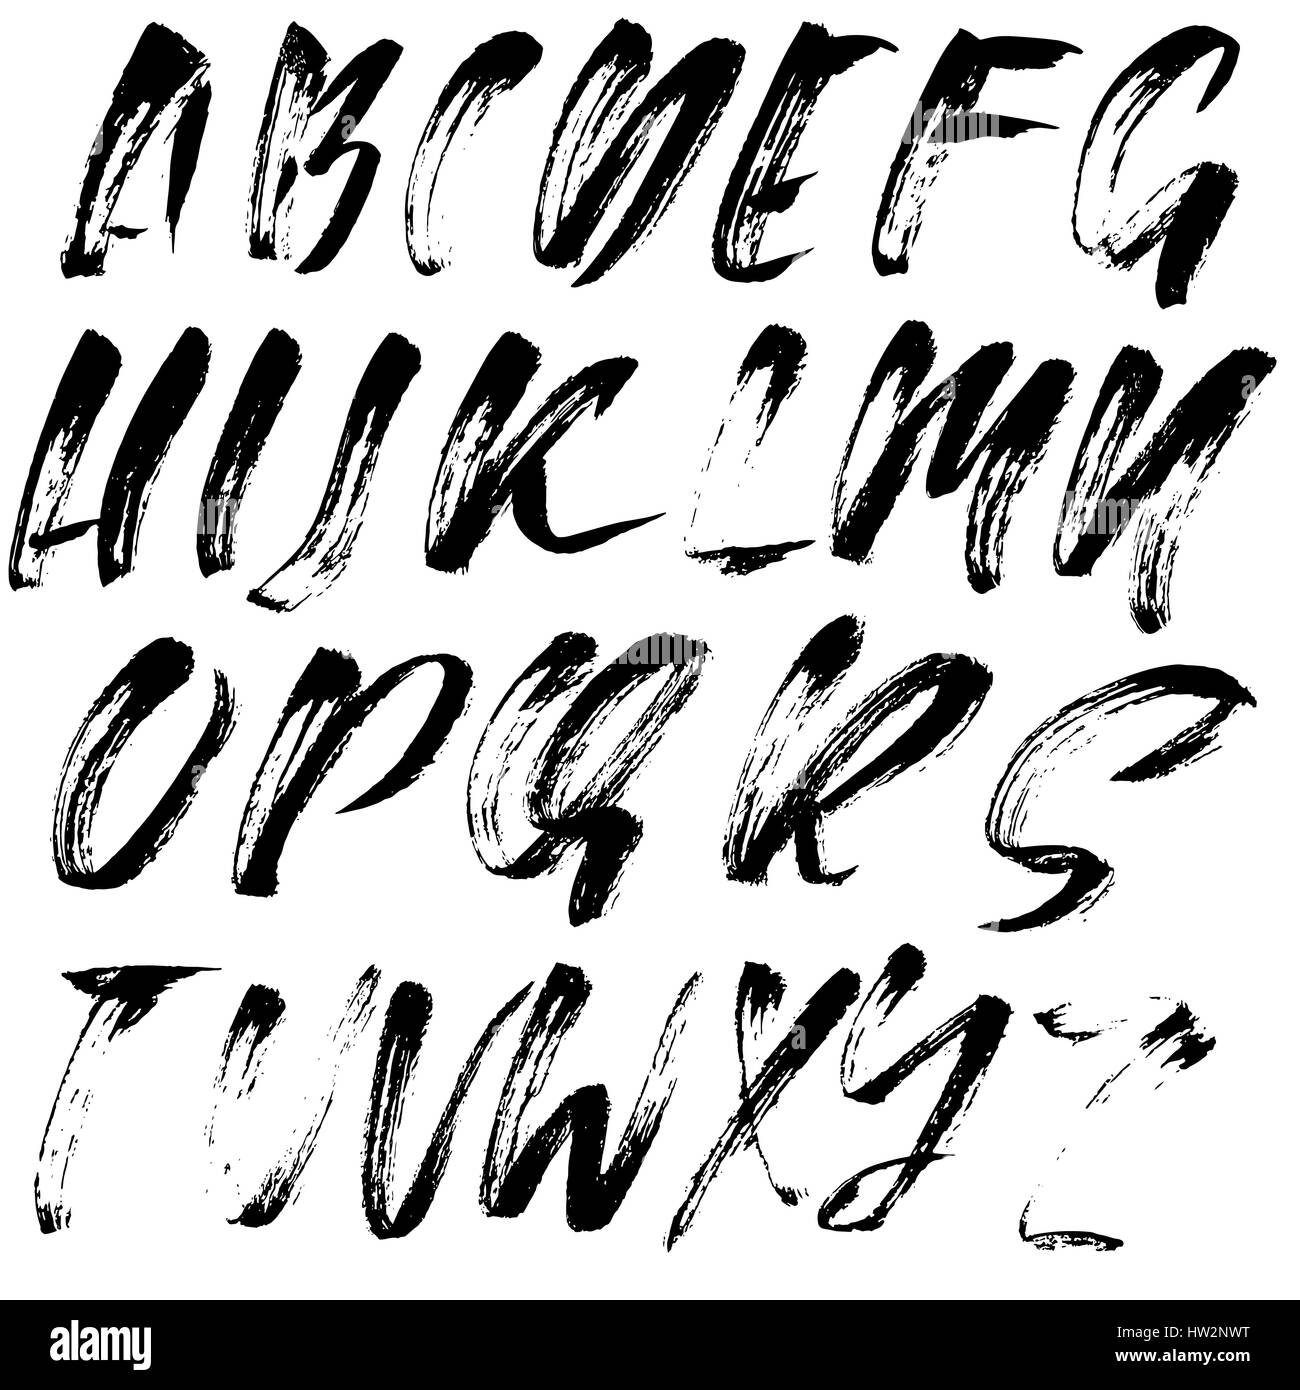 Hand drawn font made by dry brush strokes. Grunge style modern alphabet ...